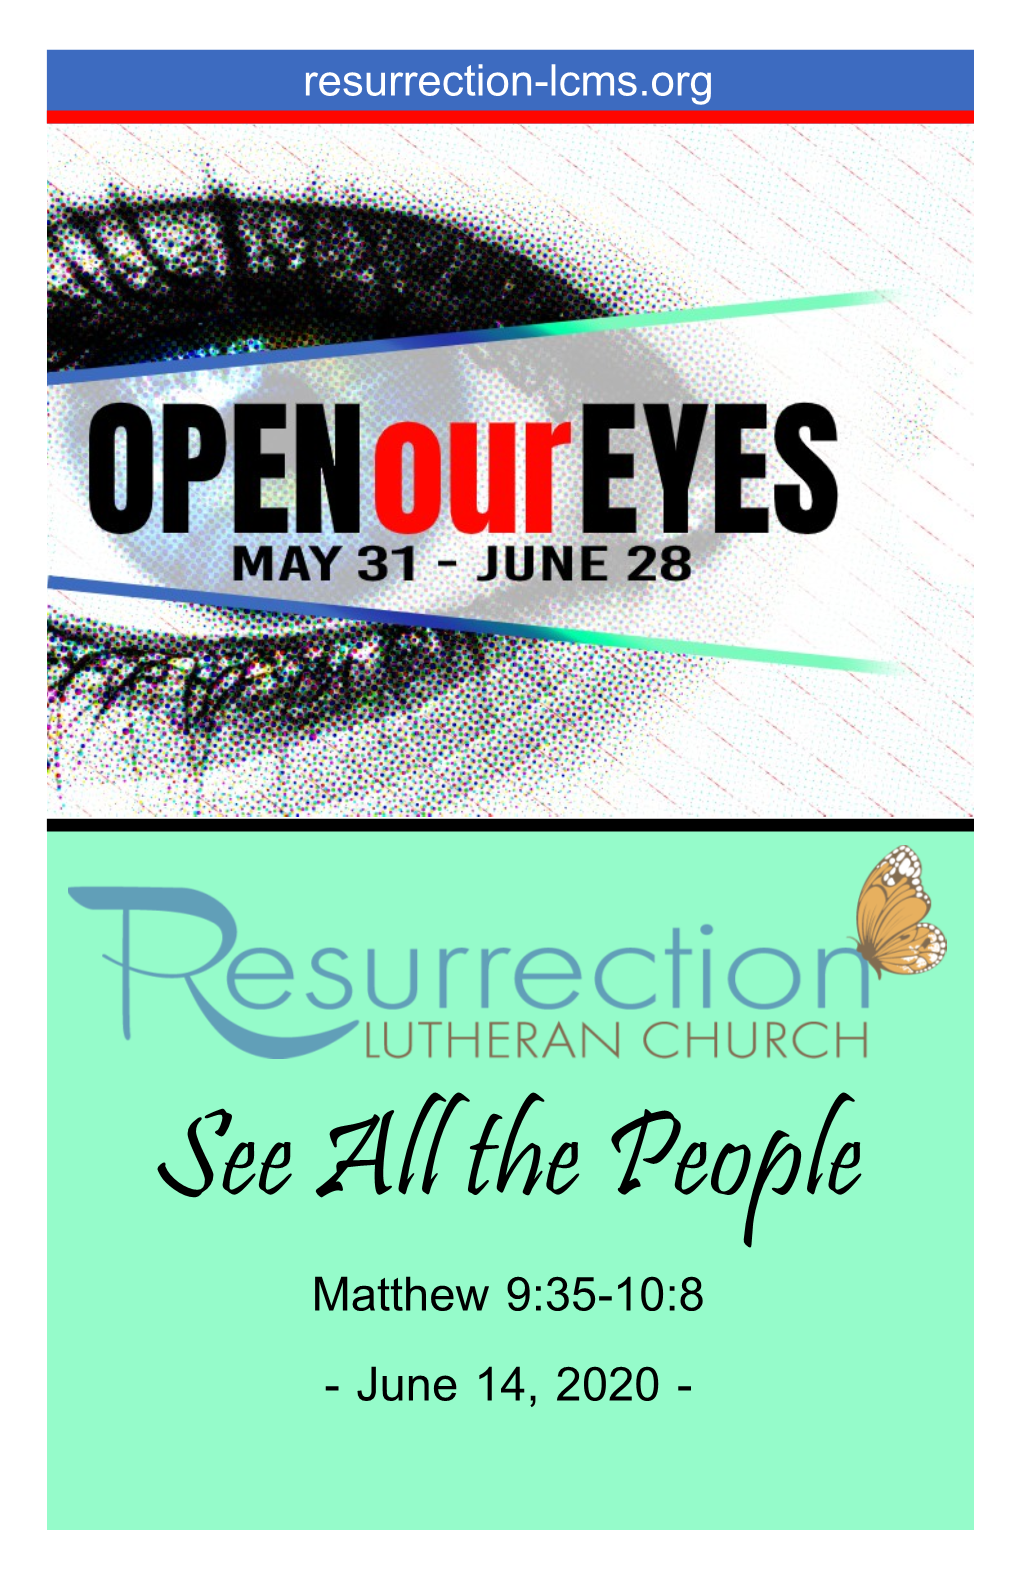 See All the People Matthew 9:35-10:8